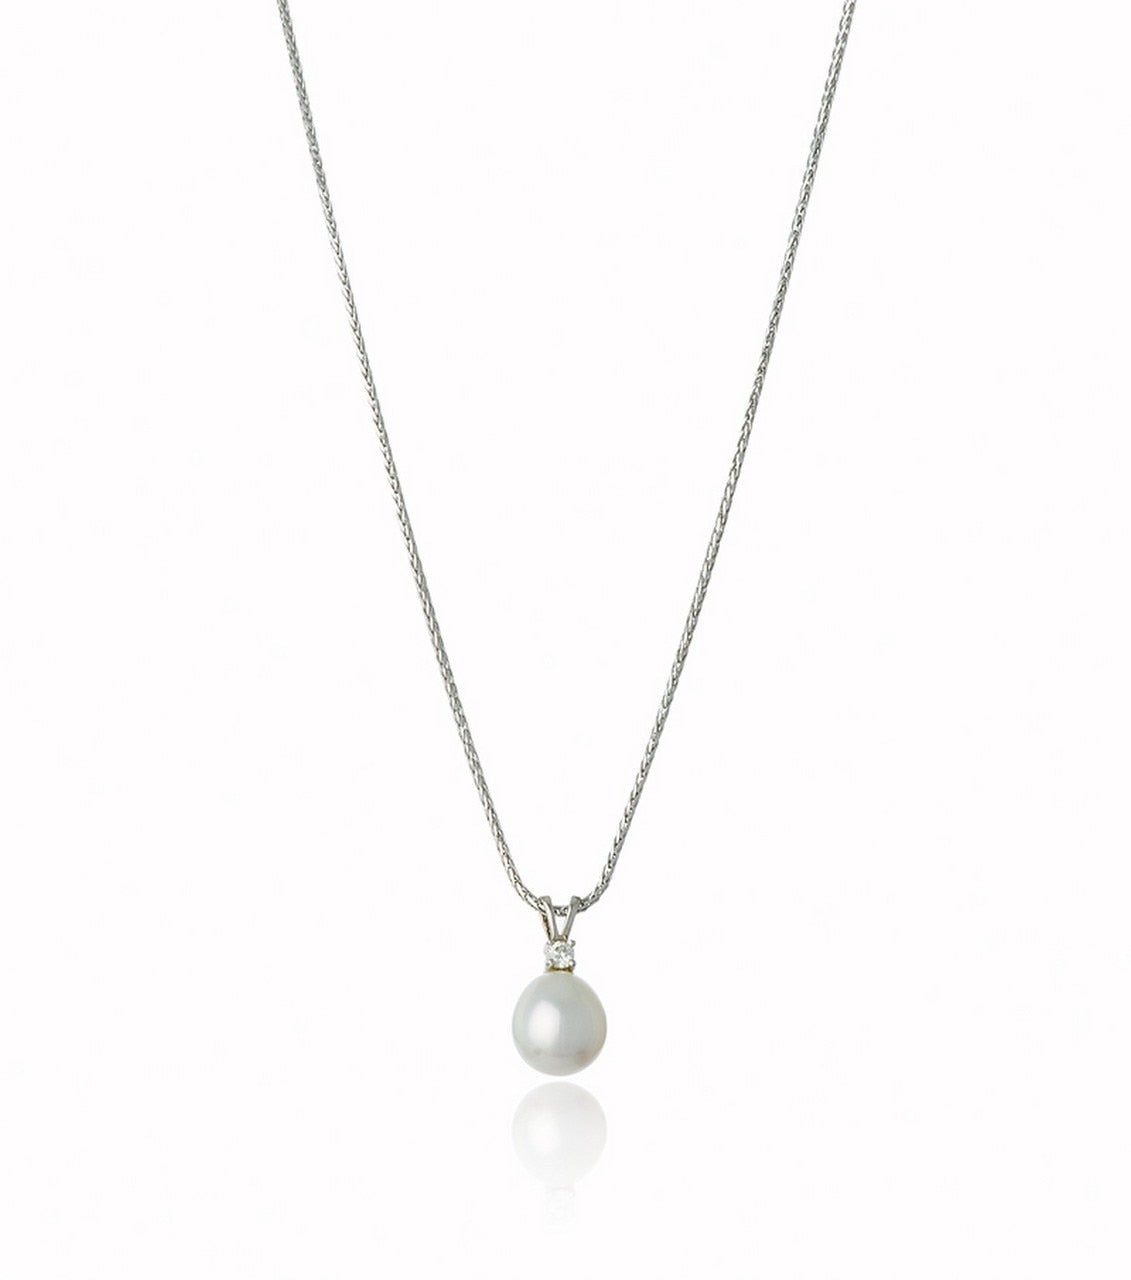 South Sea Pearl and Diamond Necklace - Thomas Laine Jewelry